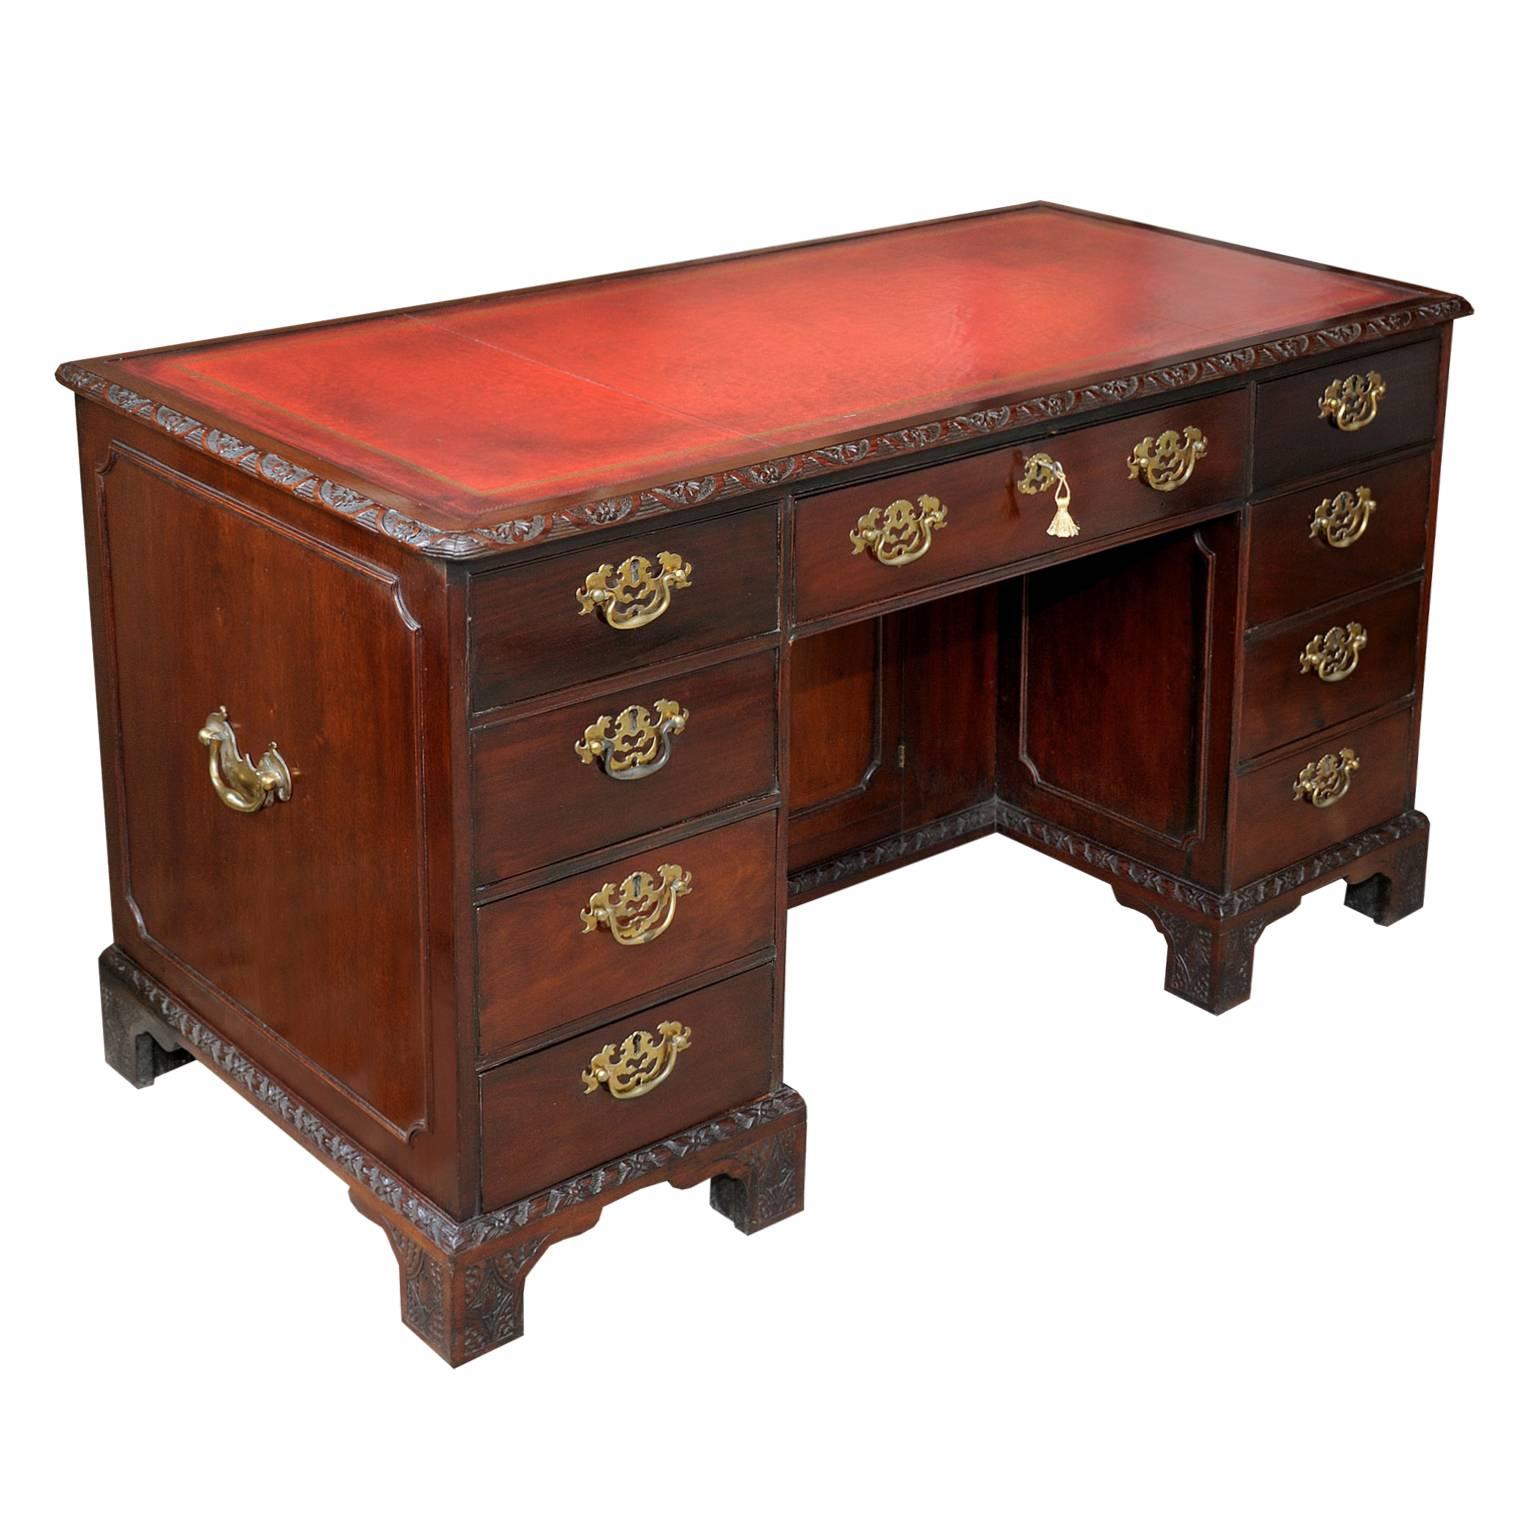 This is a very fine quality mid-19th century Chippendale style mahogany desk with a superb red tooled leather top, the desk features original locks with working keys and complete with carrying handles to the sides. This superb medium size desk would